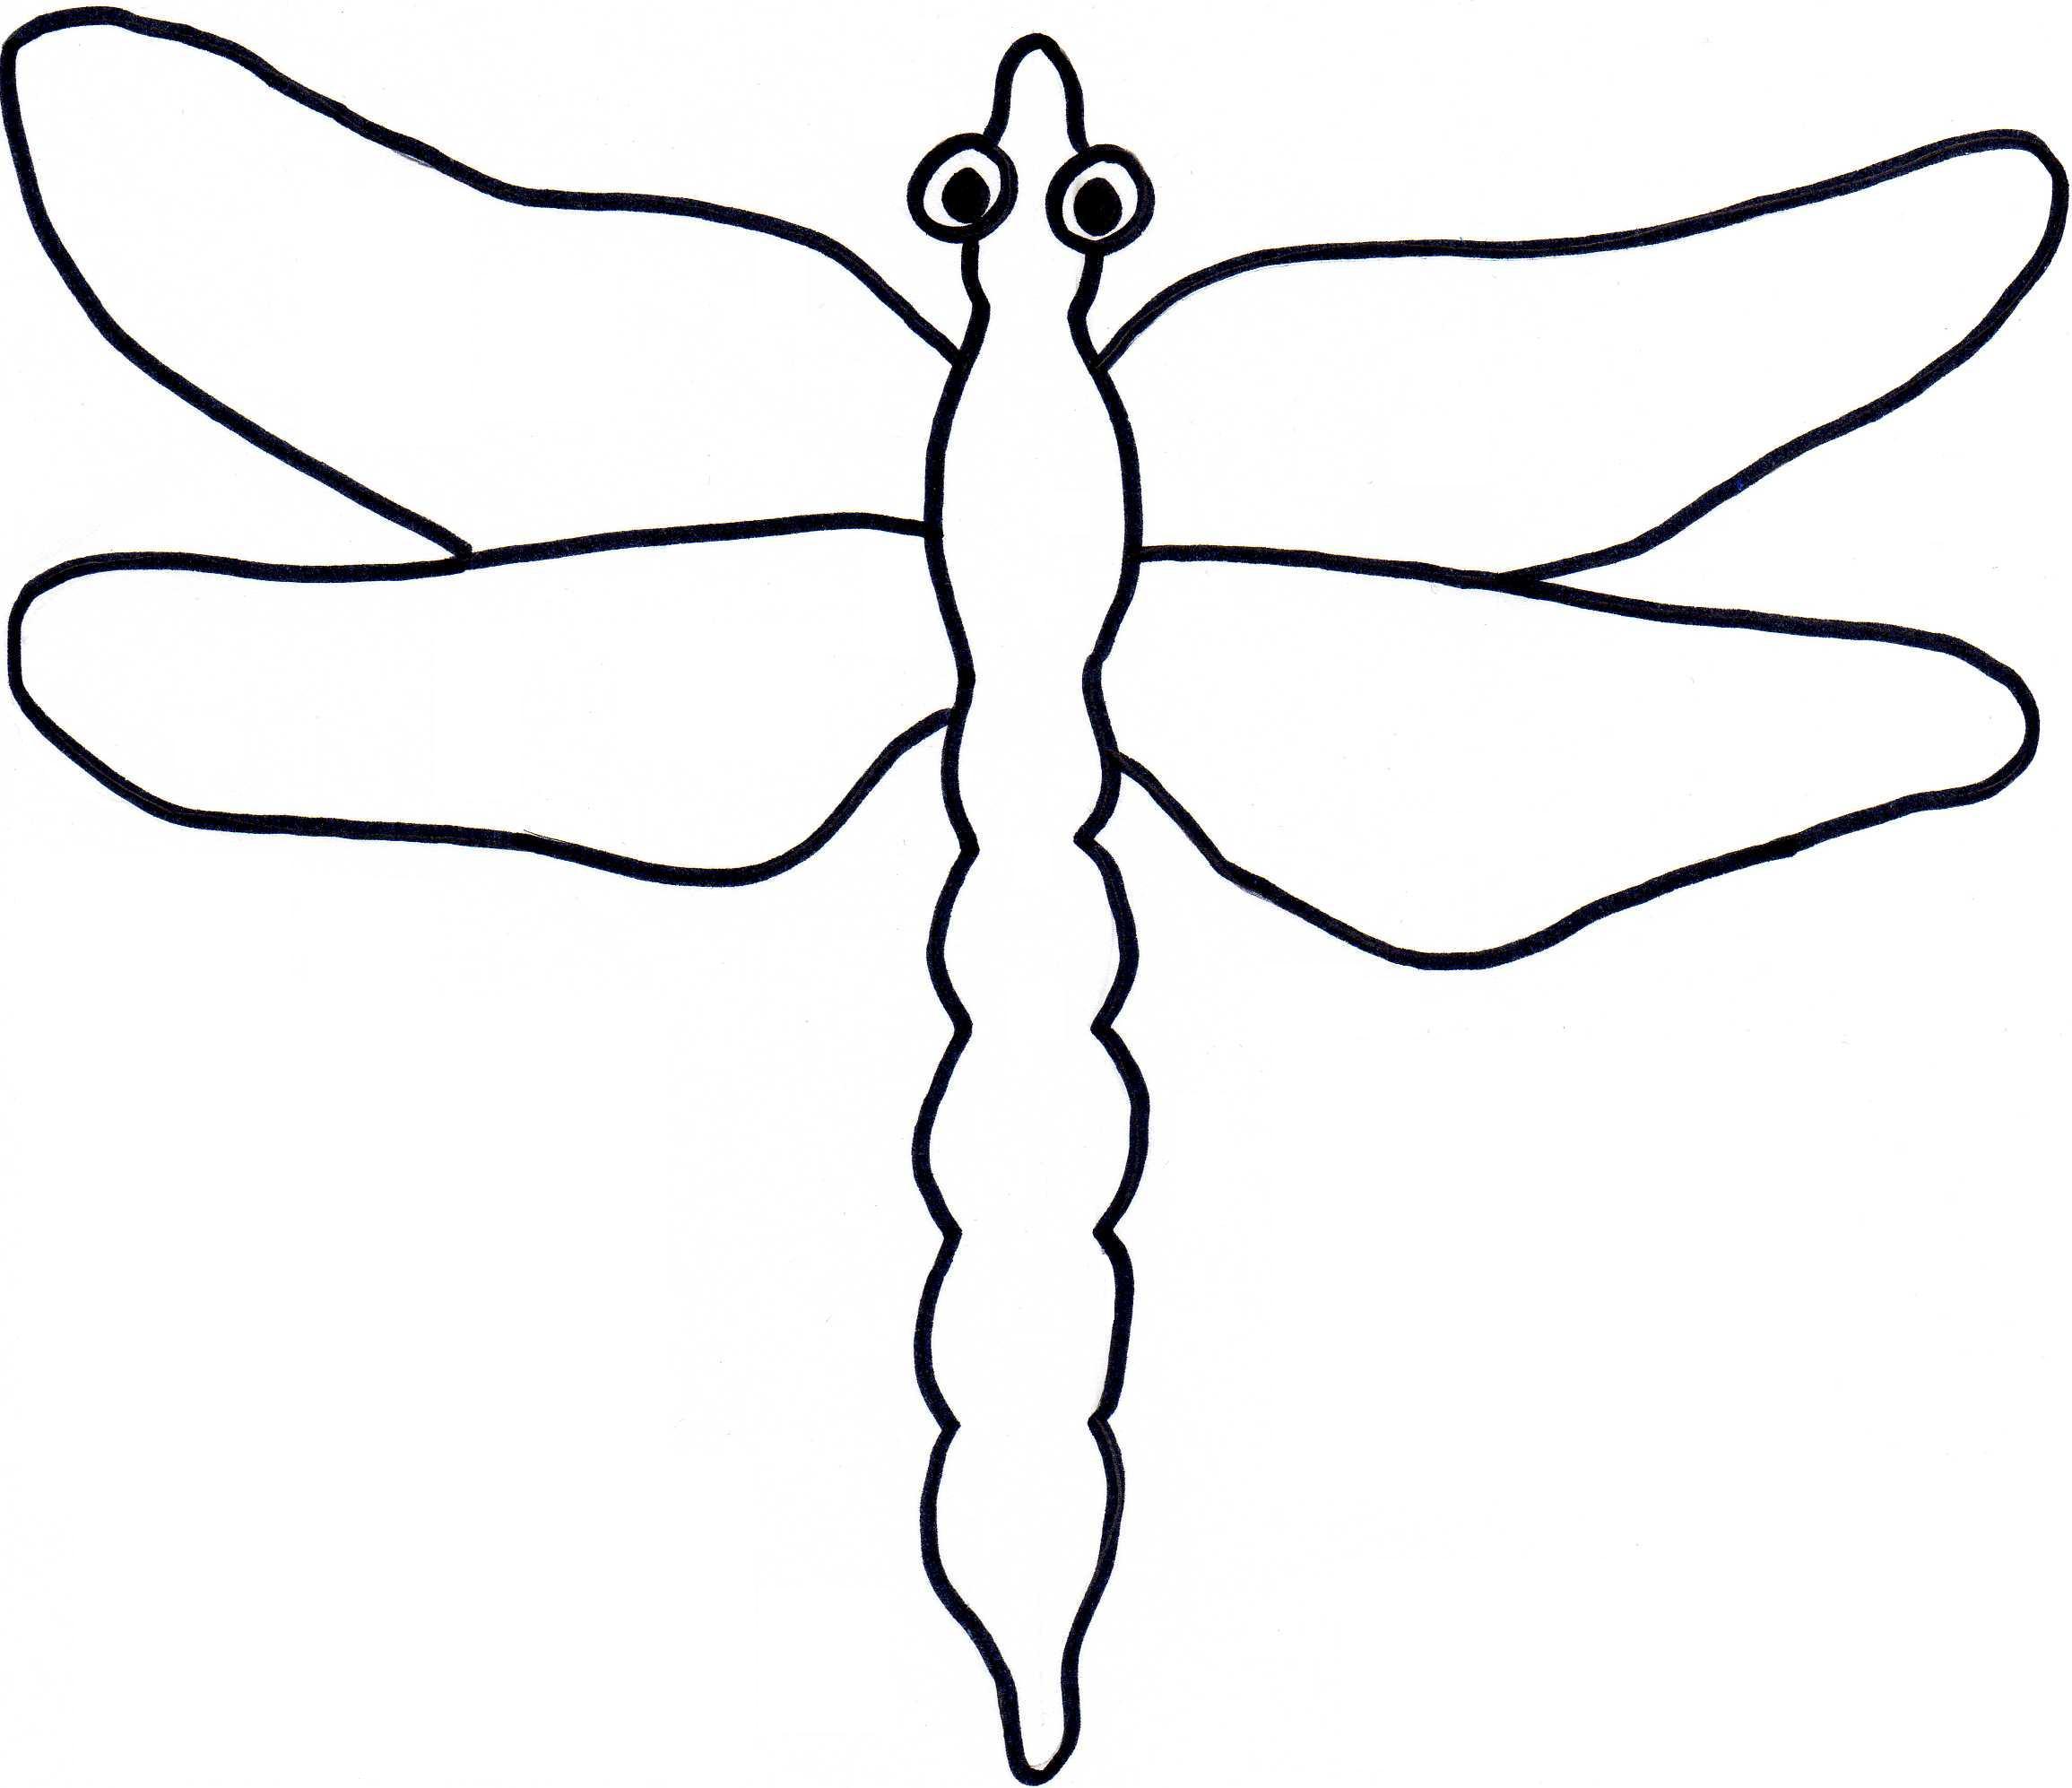 Free Dragonfly Outline, Download Free Dragonfly Outline png images ...